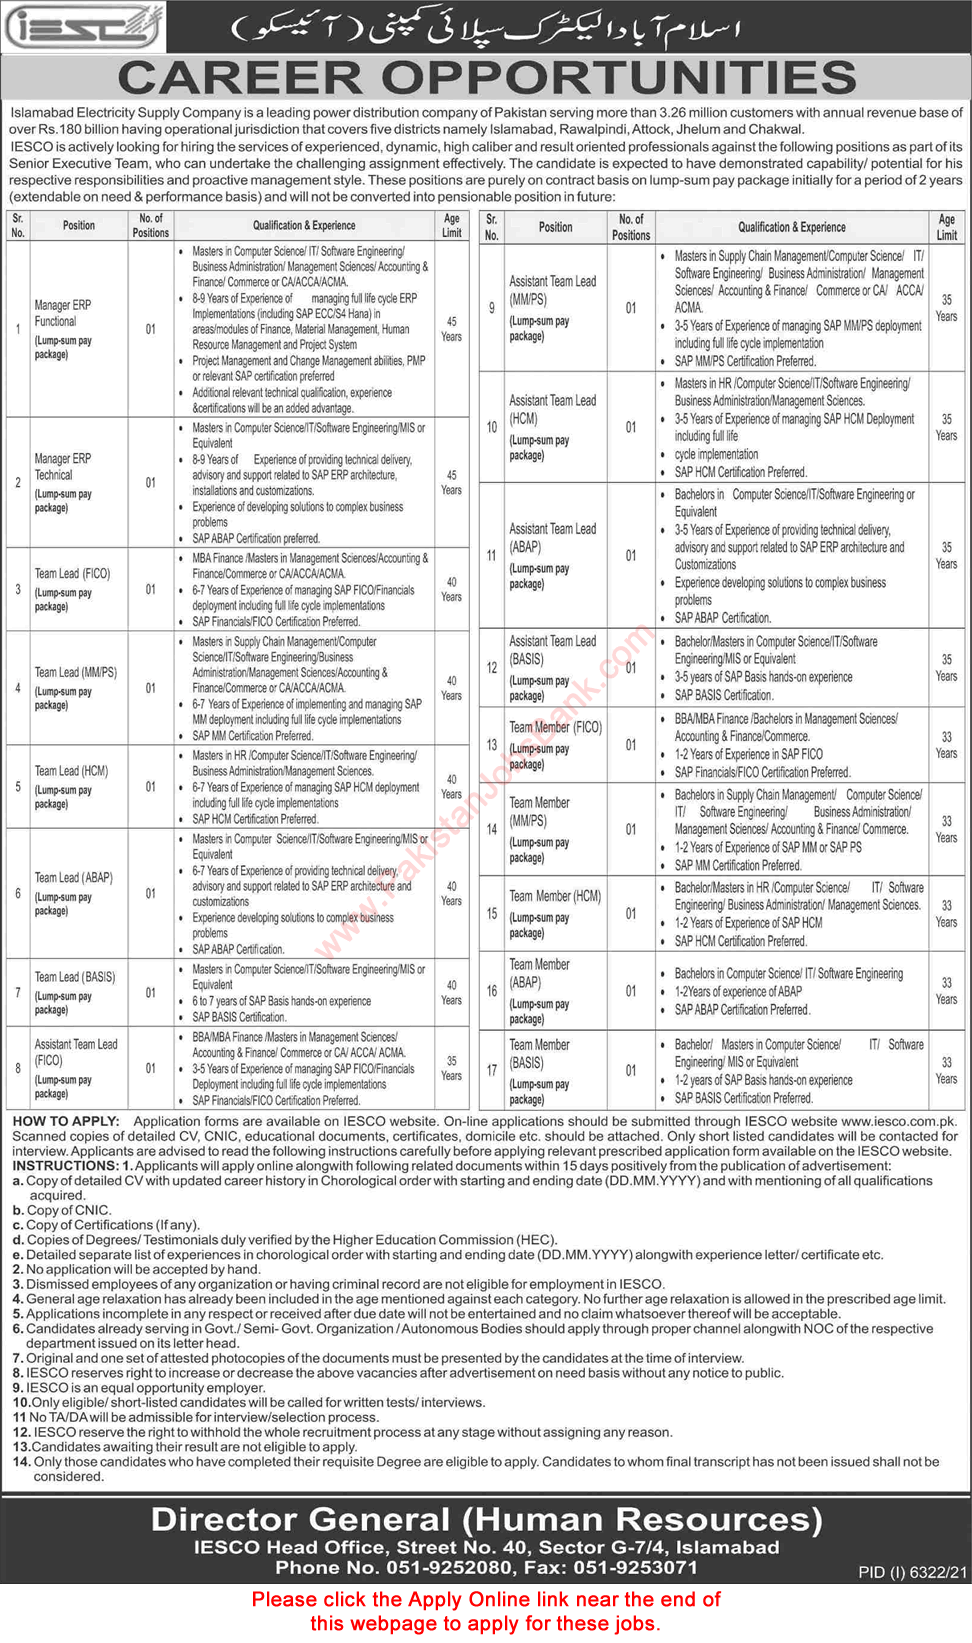 IESCO Jobs 2022 March WAPDA Apply Online Team Leads, Members & Managers Latest